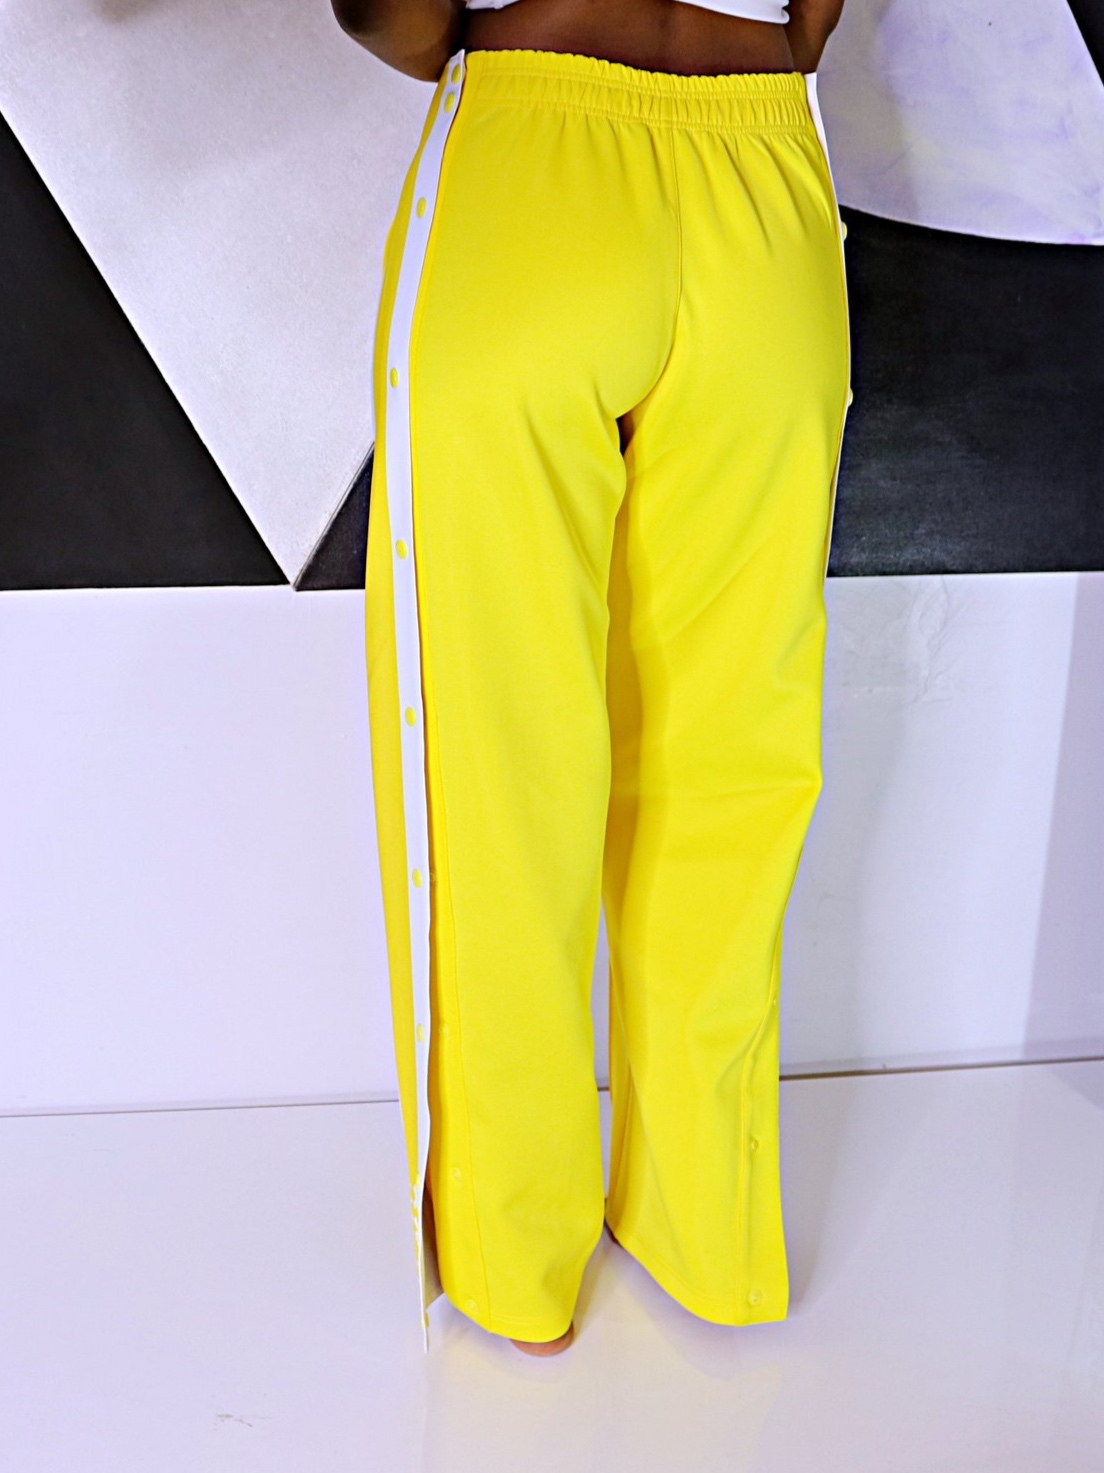 YEMESKEL SNAP BUTTON TRACK PANTS IN 